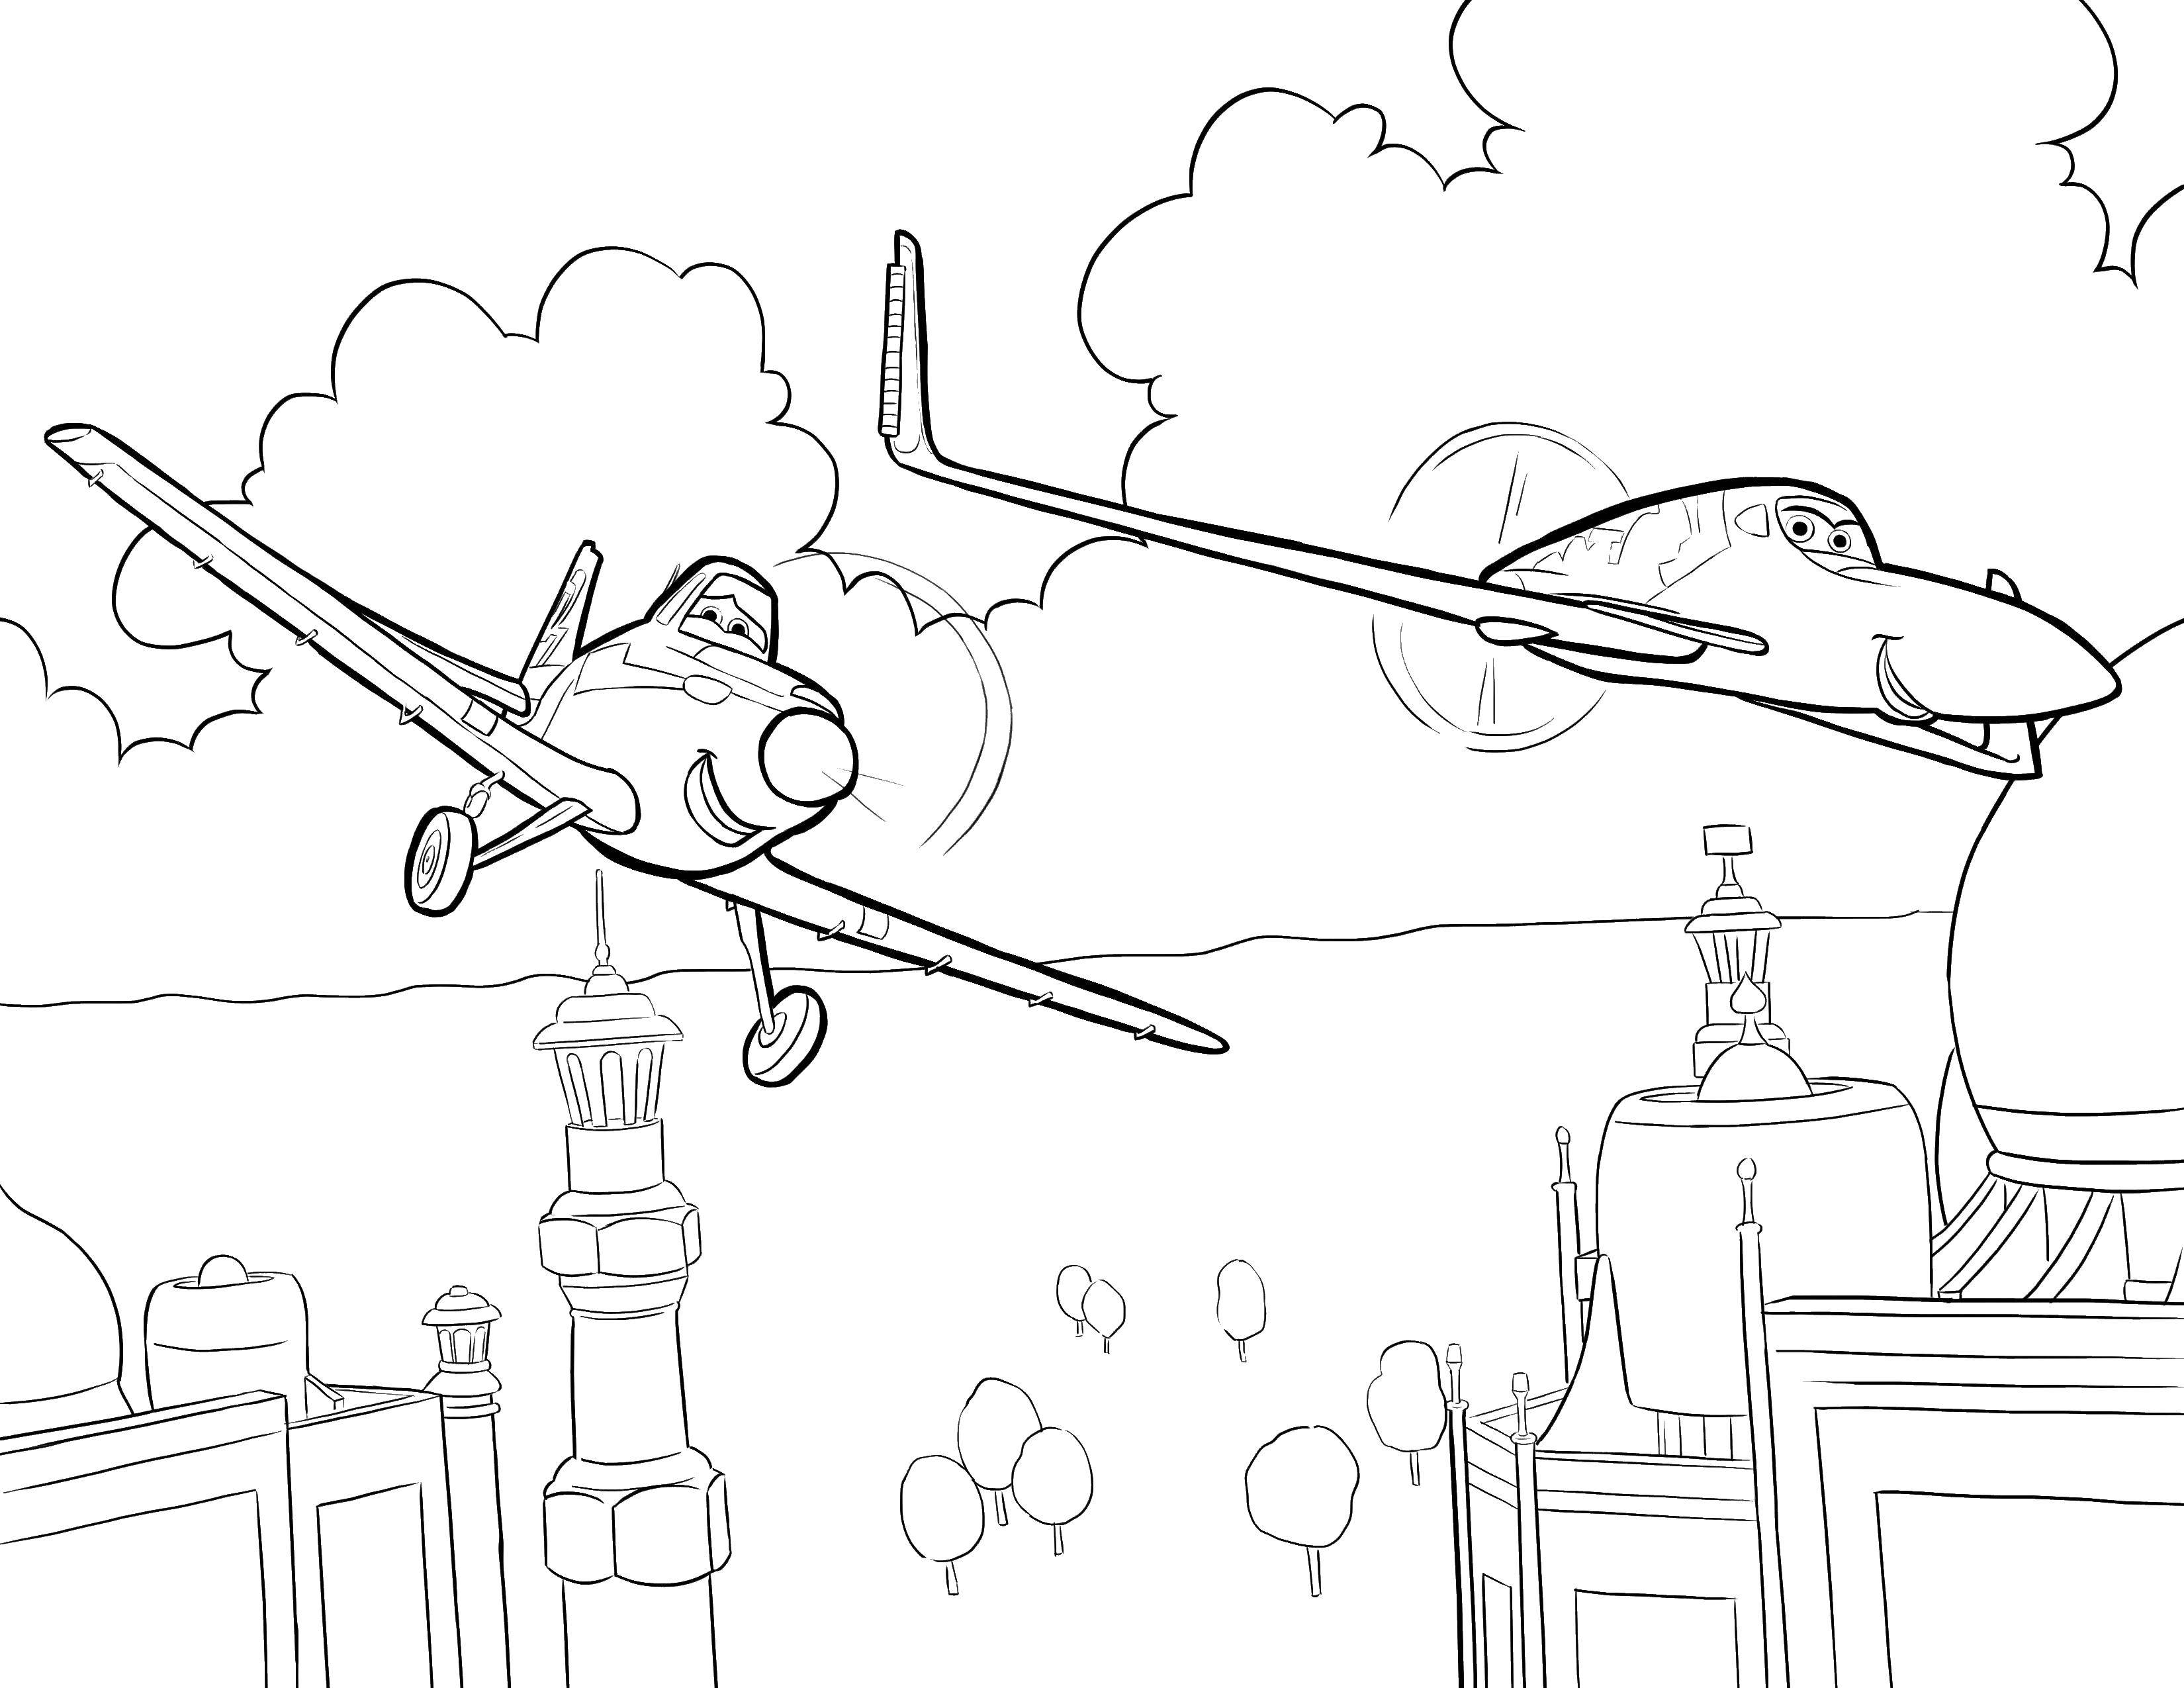 Coloring Two aircraft over the city. Category The planes. Tags:  planes, town, trees.